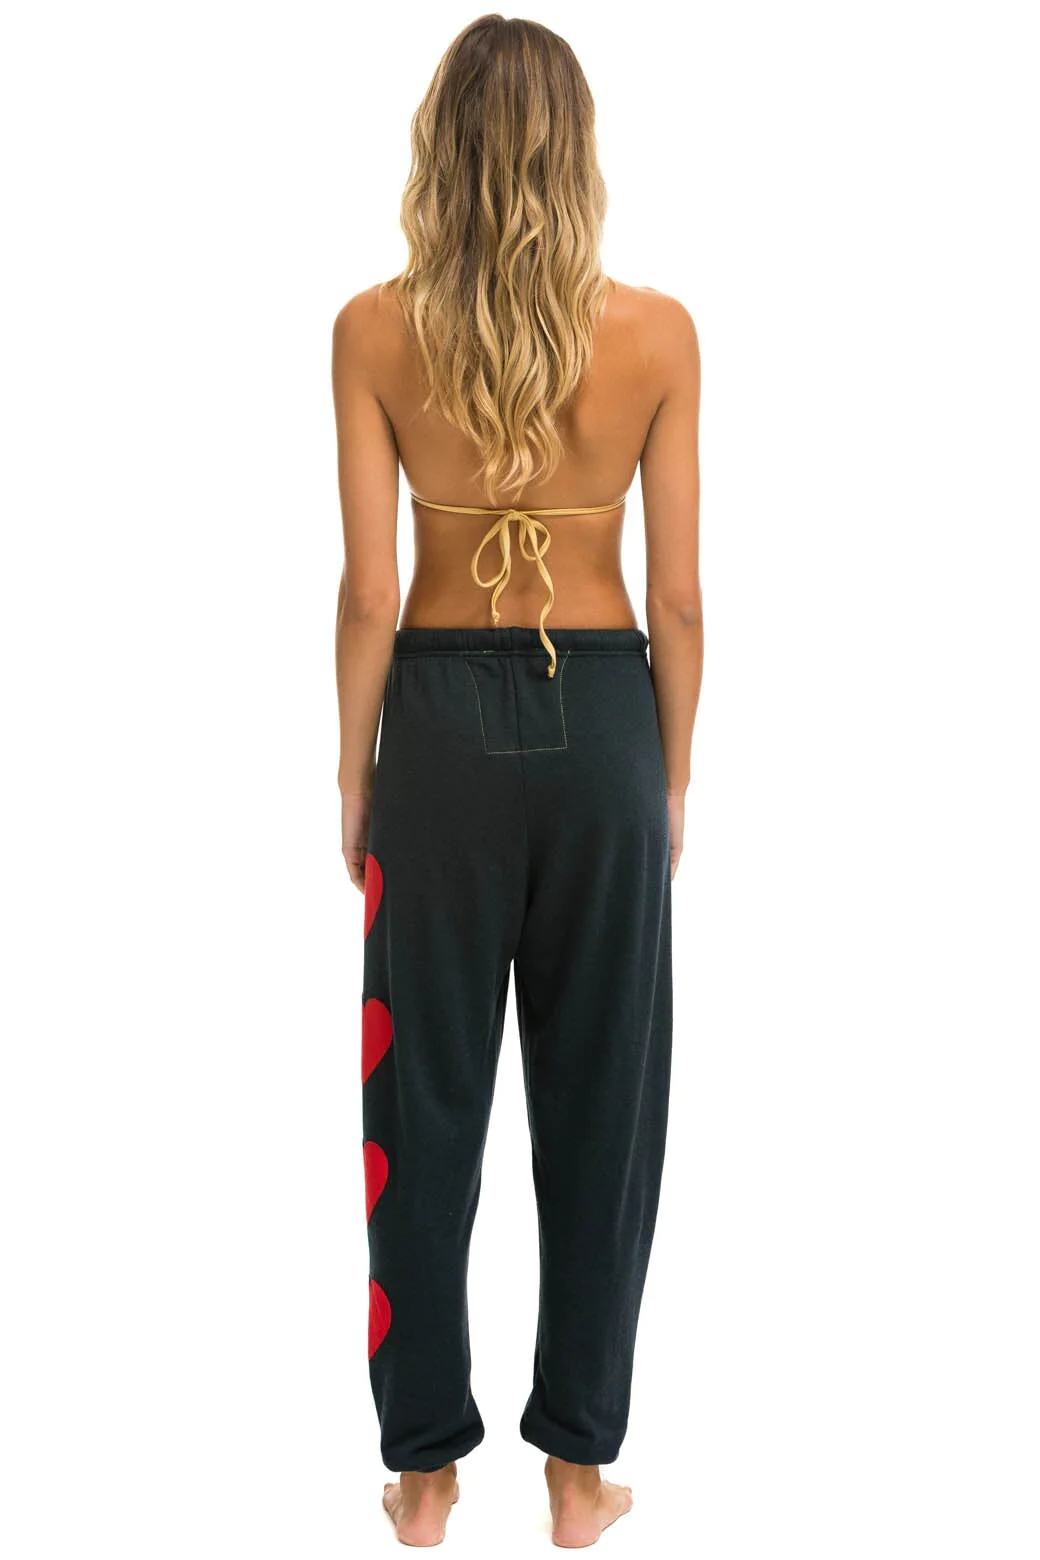 HEART STITCH 4 SWEATPANTS IN CHARCOAL - Romi Boutique